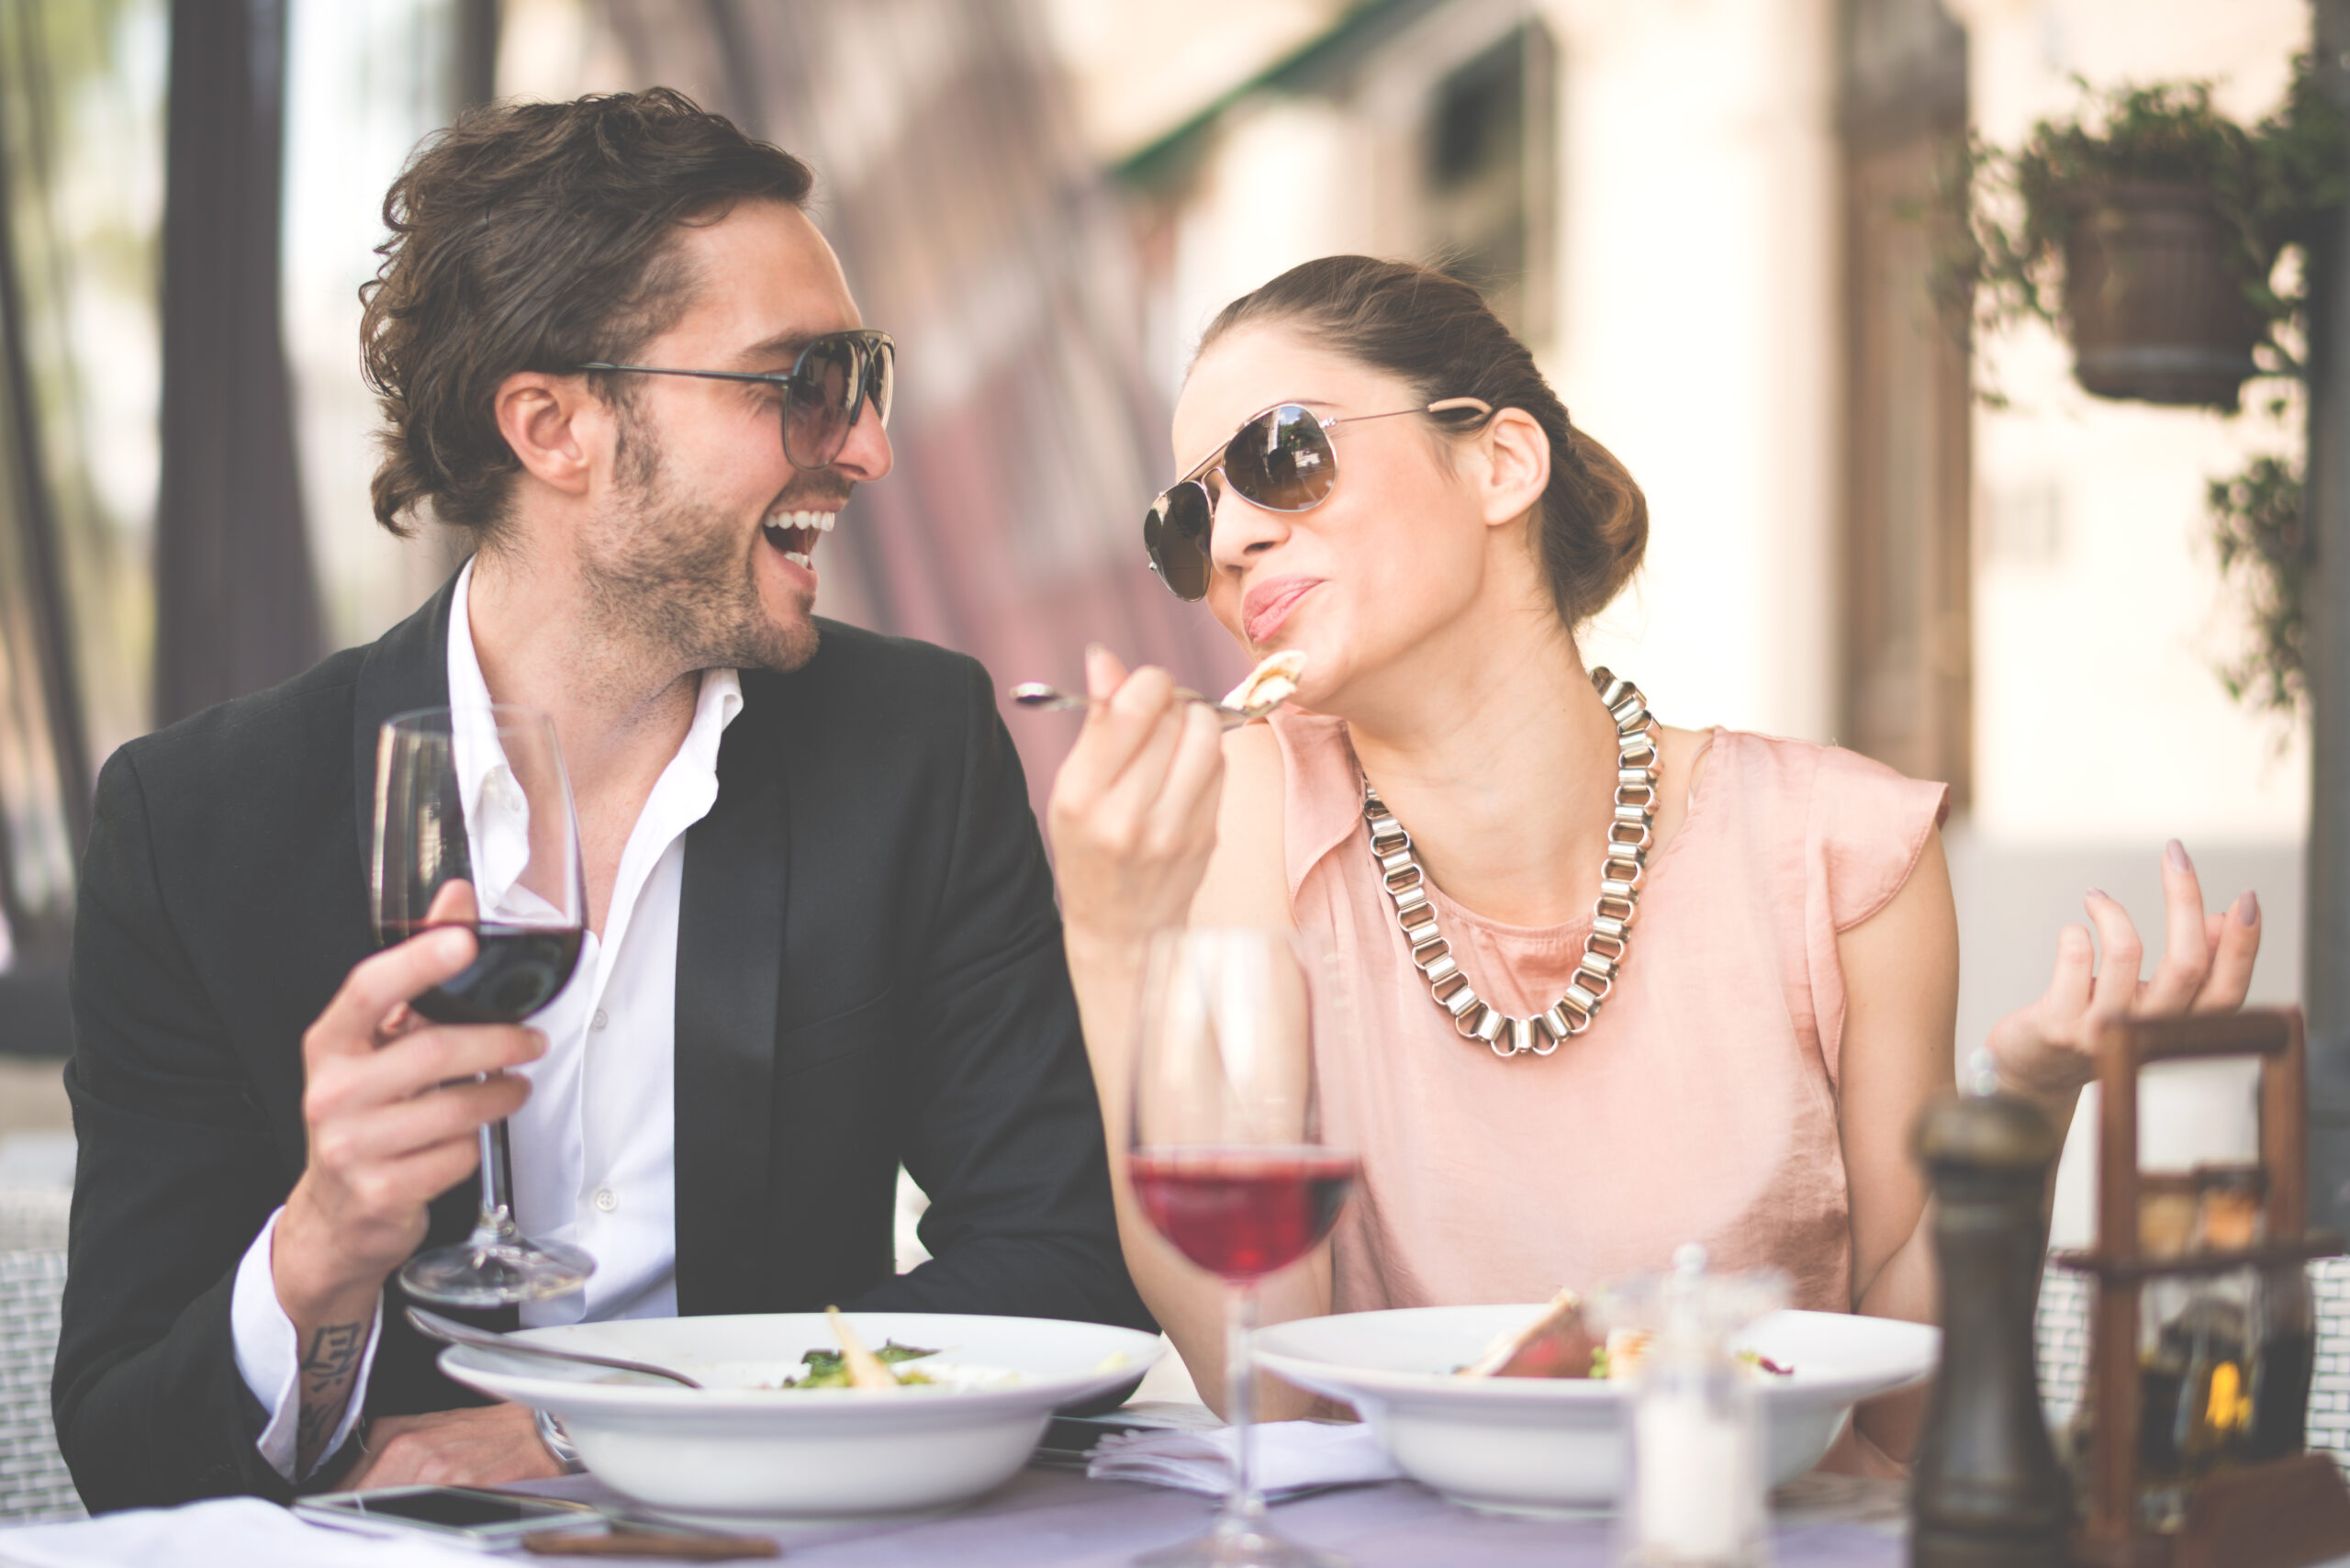 Nicely dressed couple with sunglasses sitting in restaurant and having a meal. Man is holding his wine glass and woman is about to take a bite. They are looking at each other and smiling.